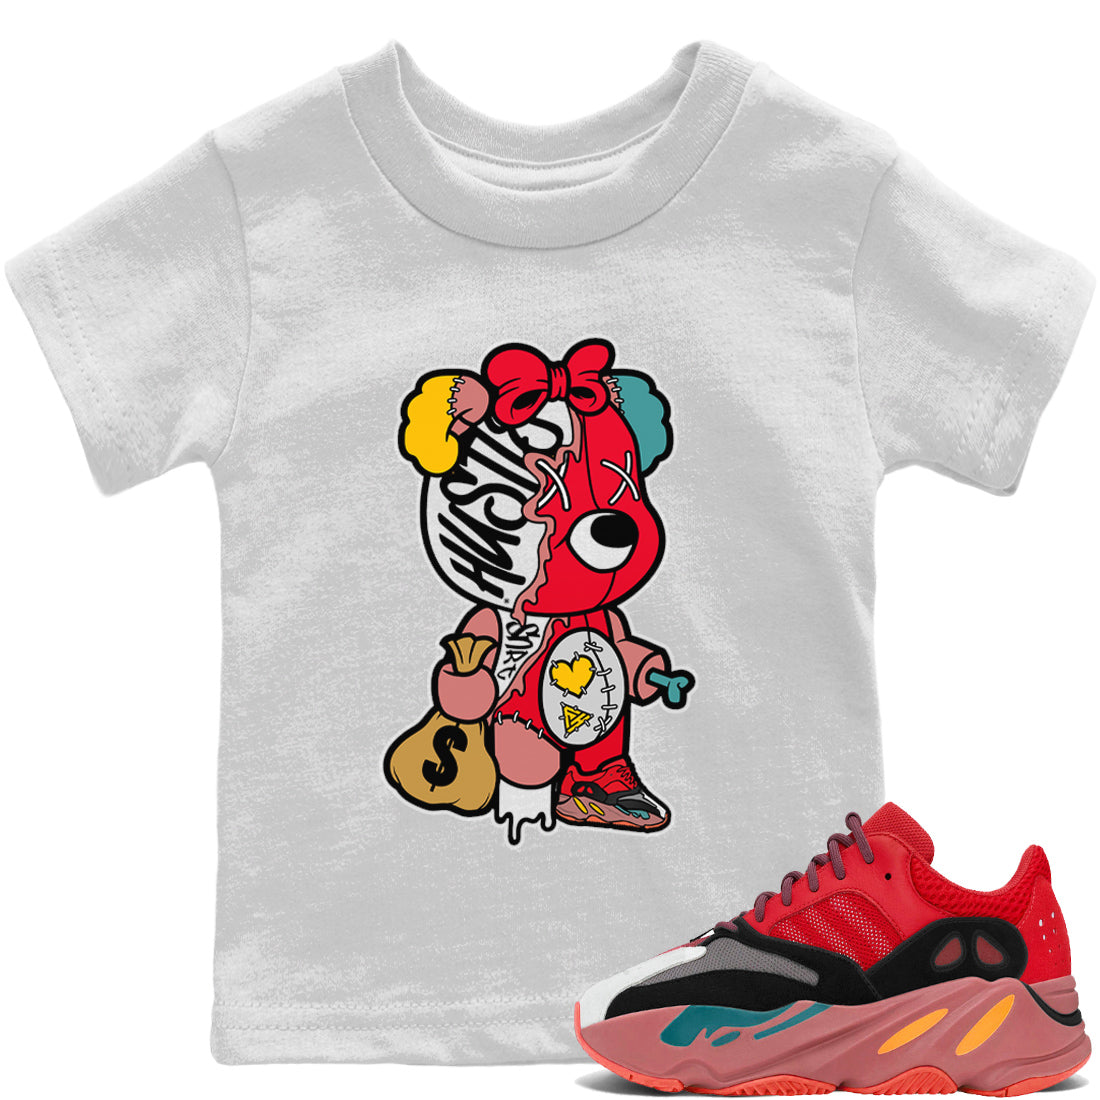 Yeezy 700 Hi-Res Red Sneaker Match Tees Stitched Hustle Bear Sneaker Tees Yeezy 700 Hi-Res Red Sneaker Release Tees Kids Shirts